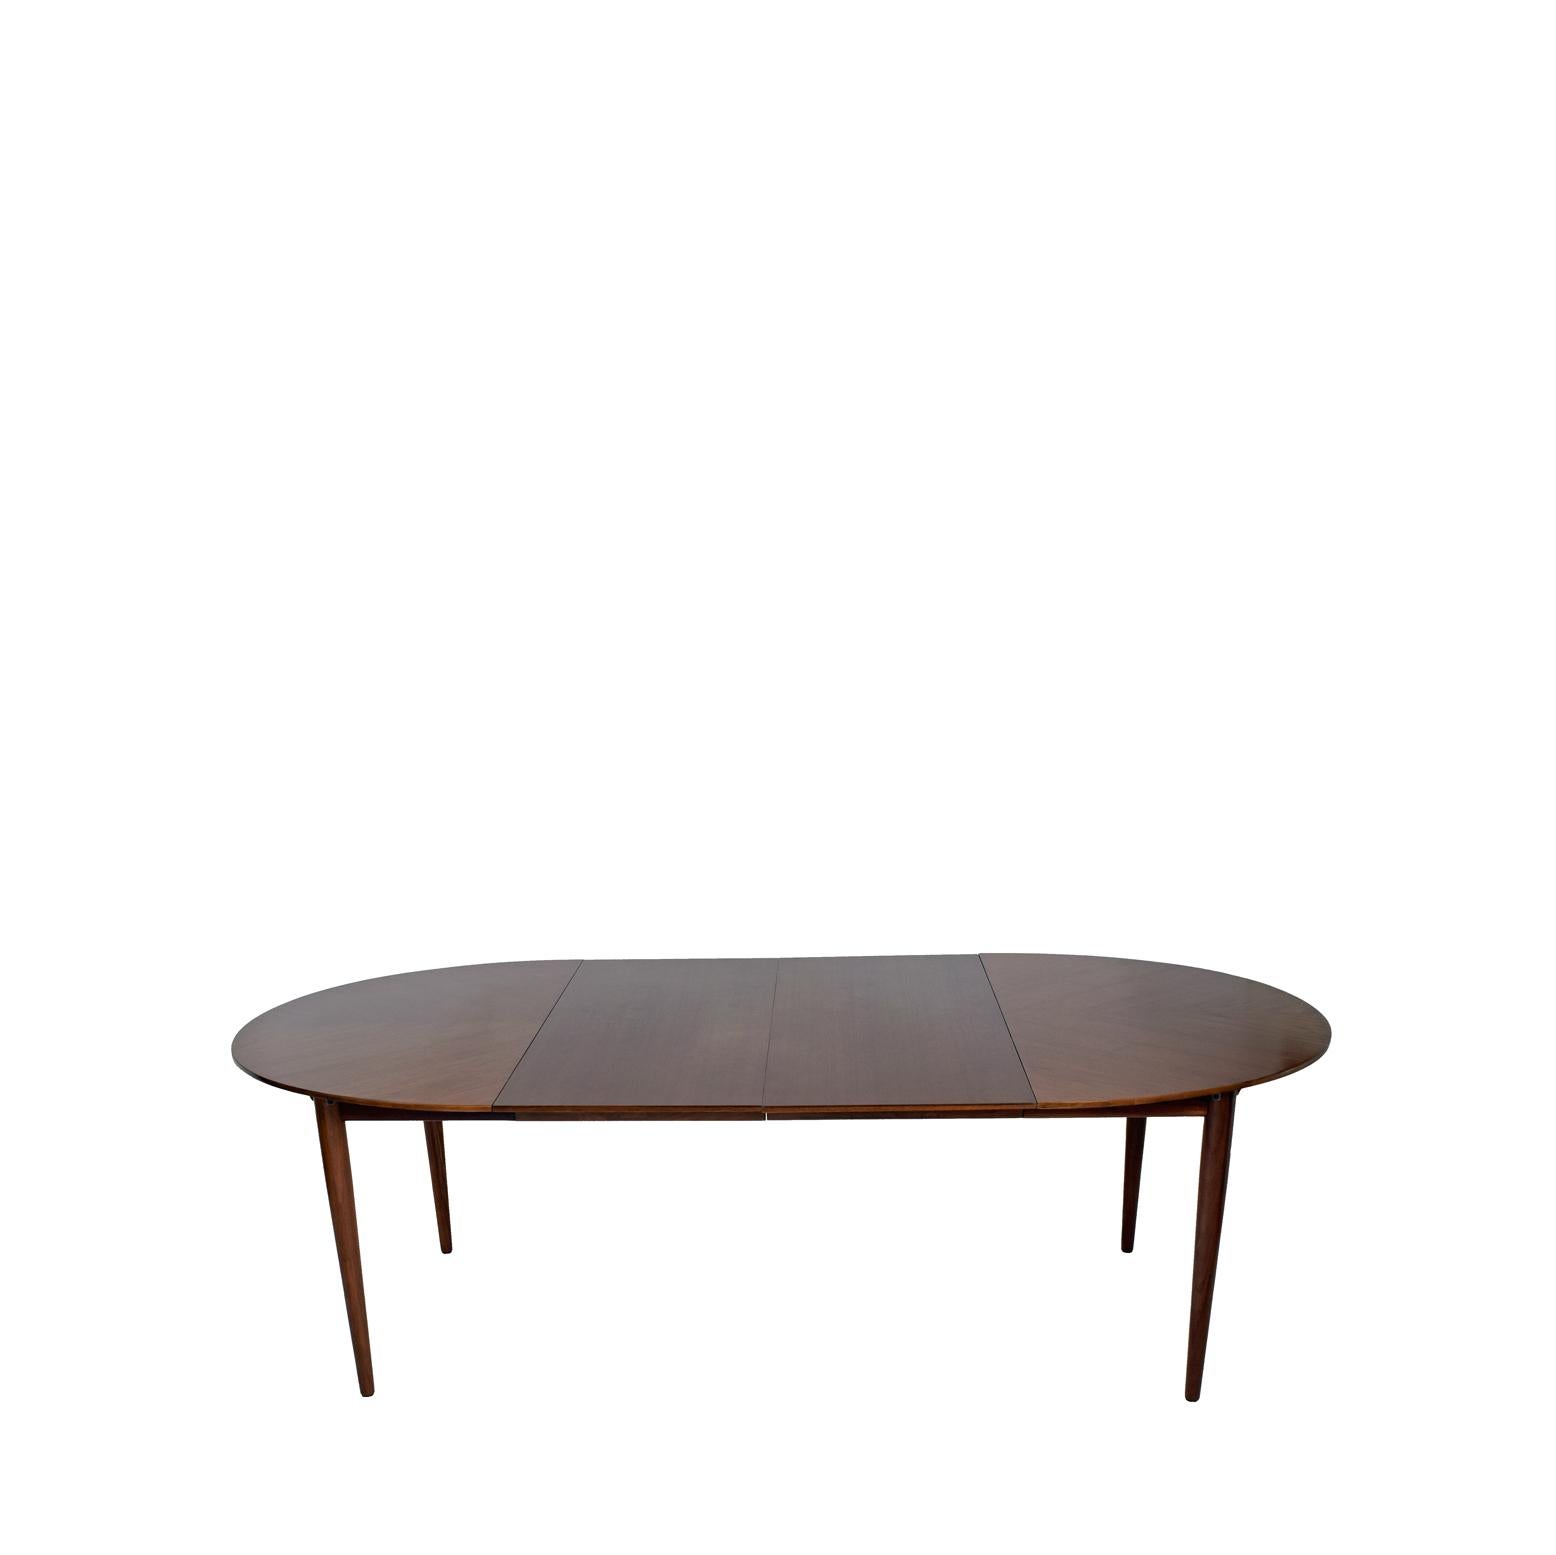 Oval dining table with two leaves walnut design by Finn Juhl Baker metal tag
total with 94